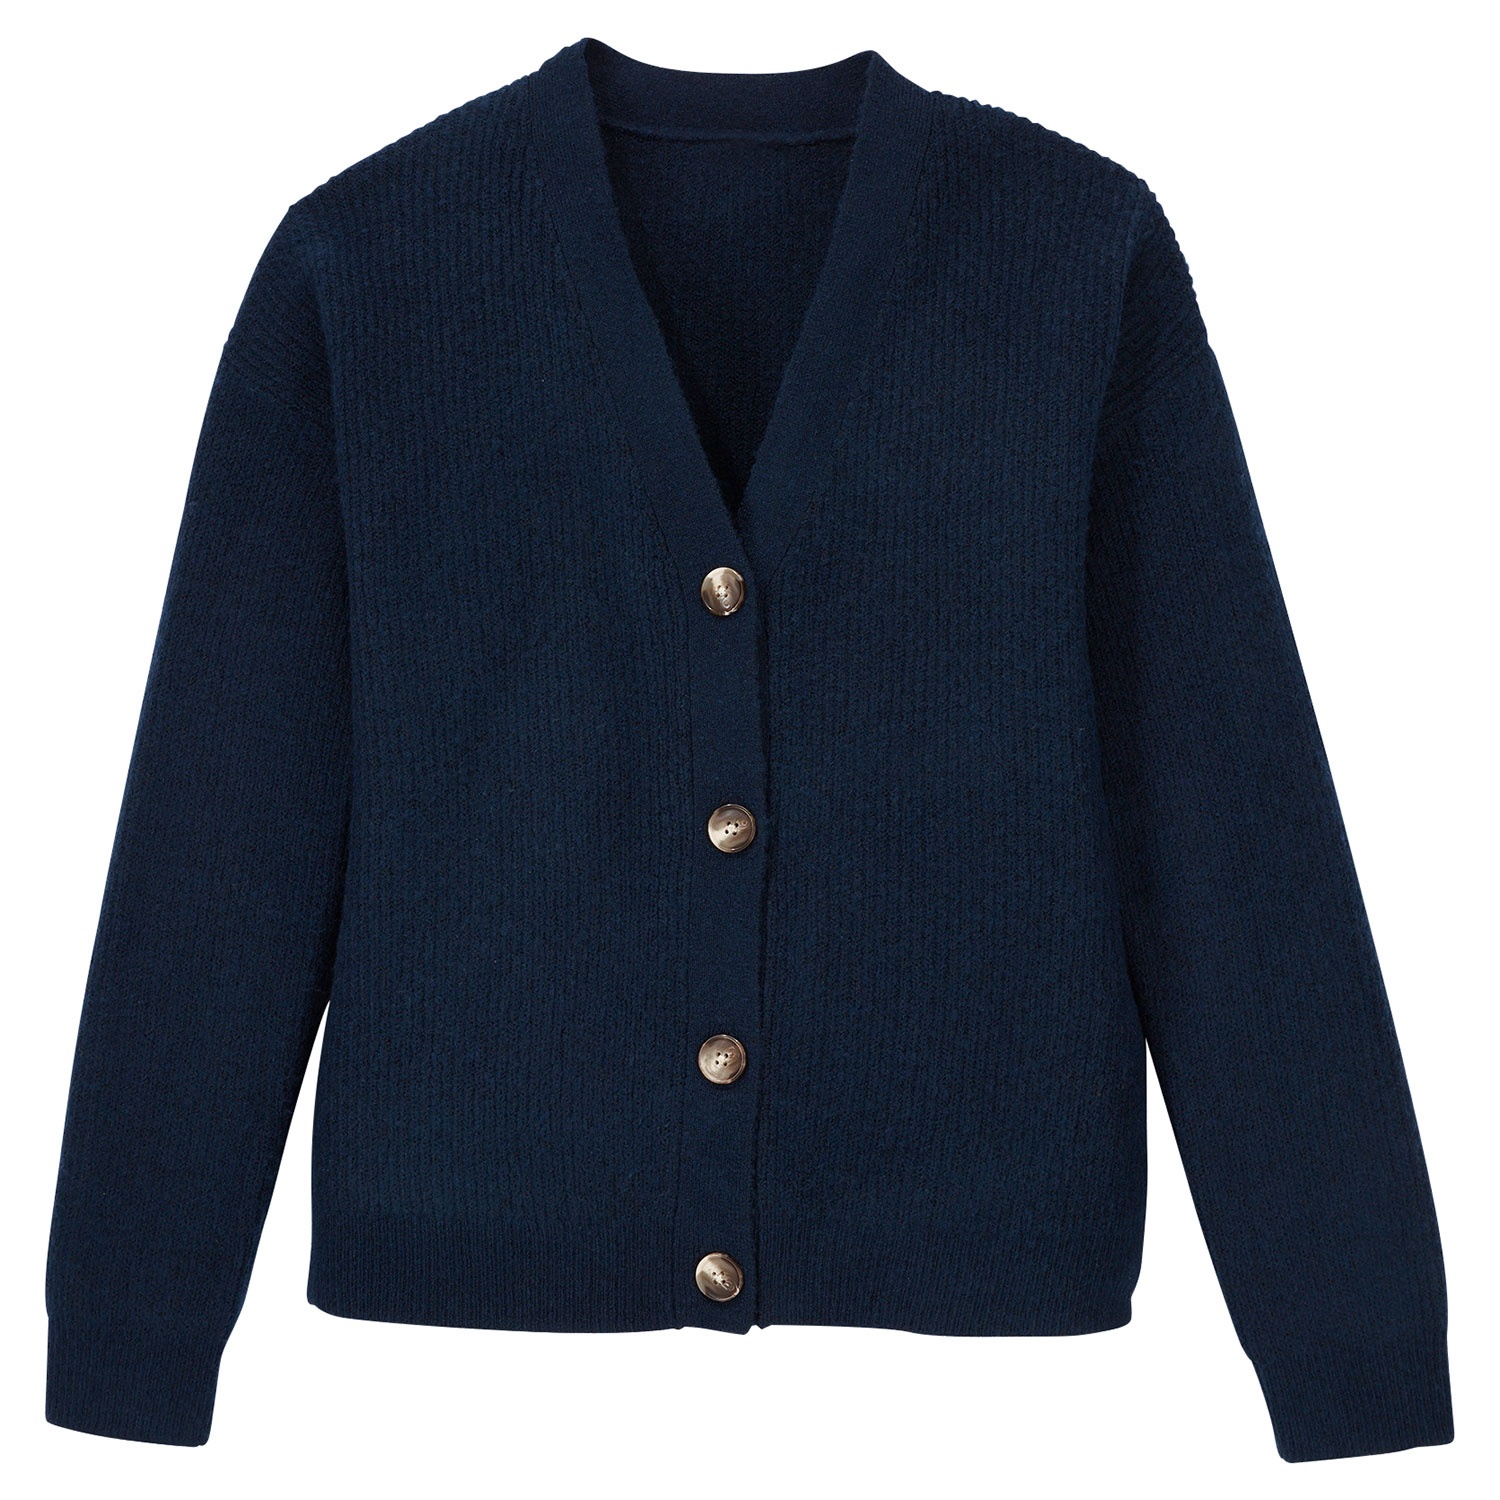 BLUE MOTION Damen Cardigan oder Pullover, recycled